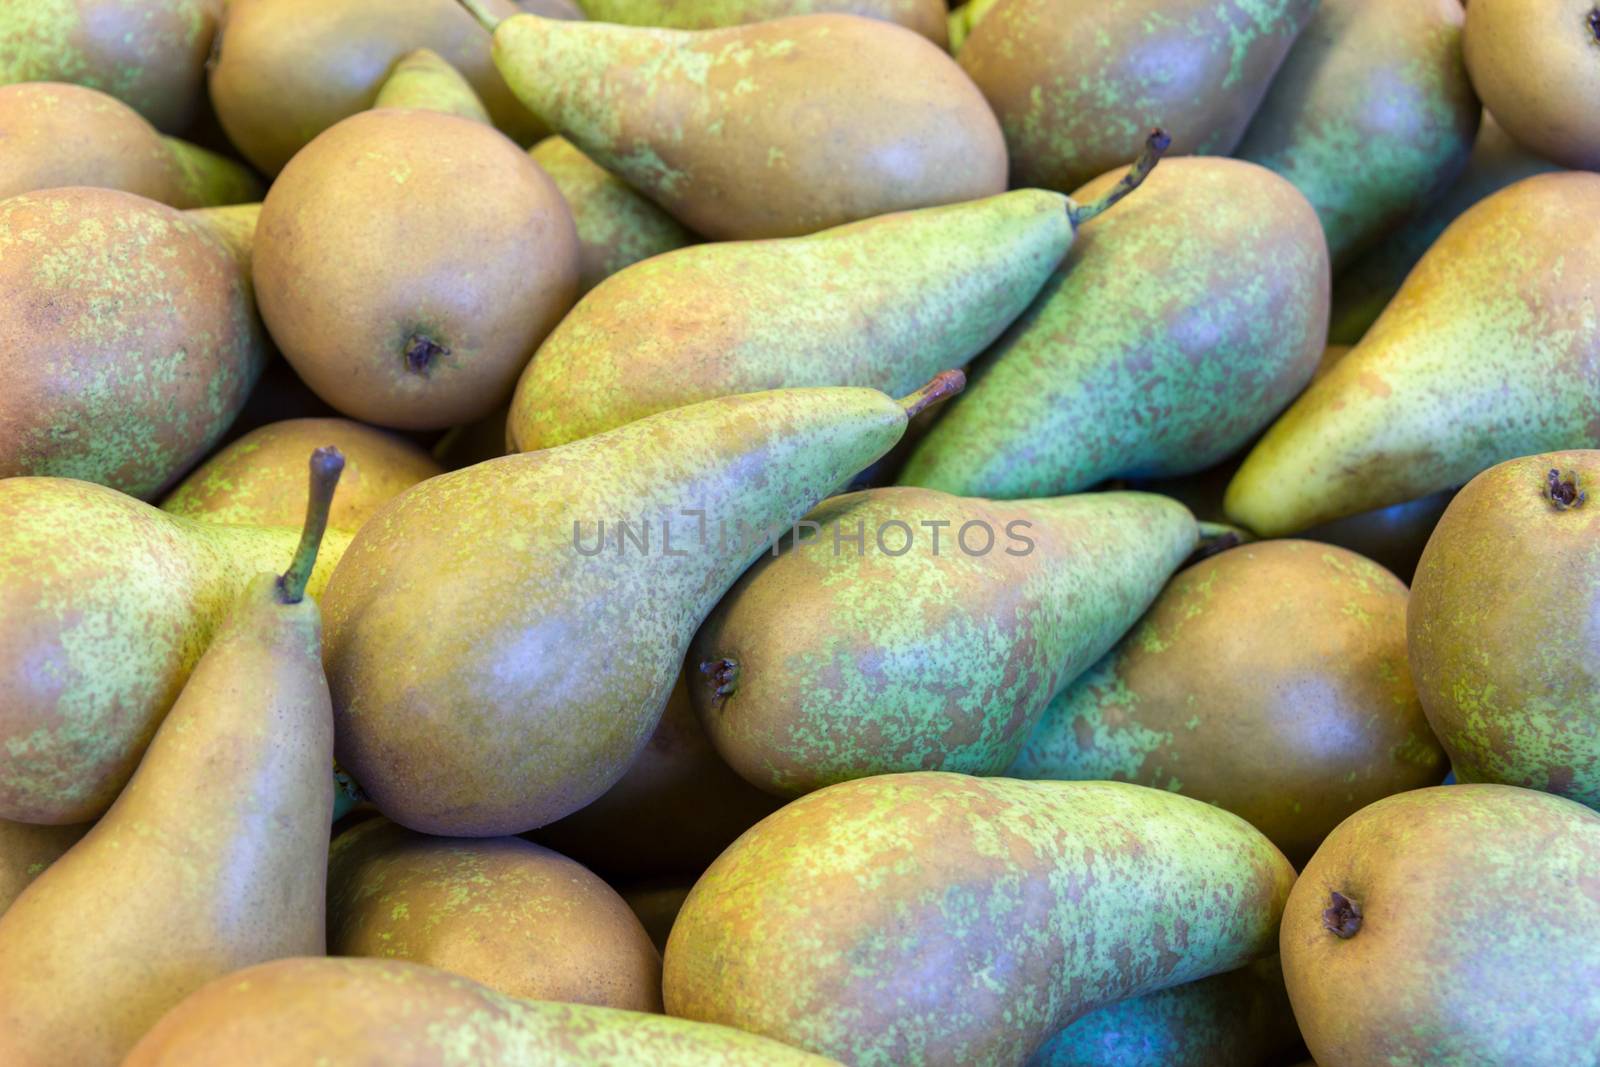 Several green pears by BenSchonewille